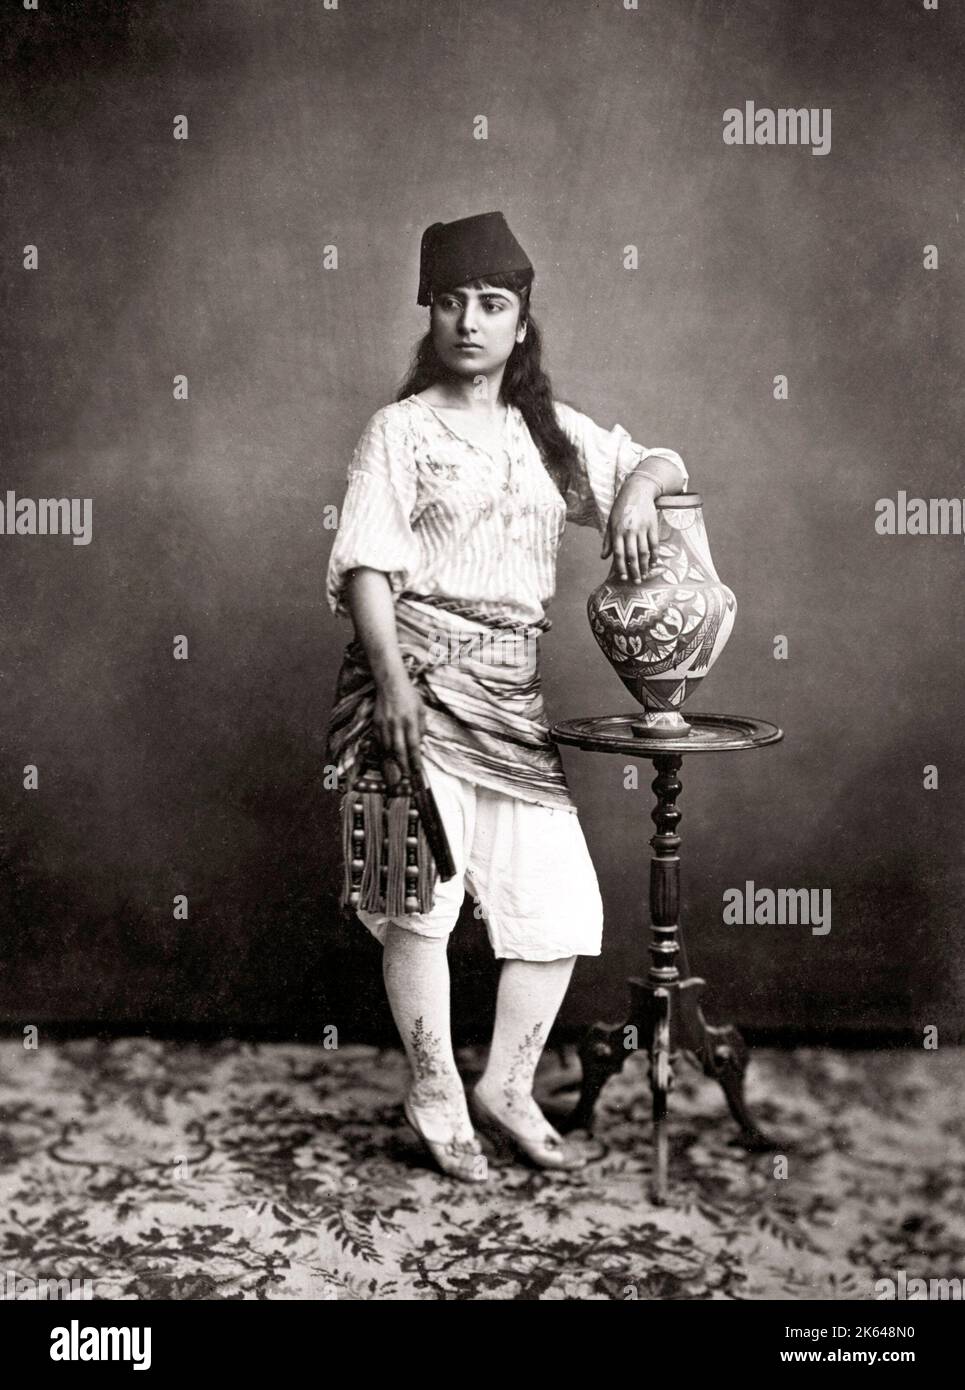 Young Turkish woman with ornate stockings and vase, Turkey, c.1880's Stock Photo